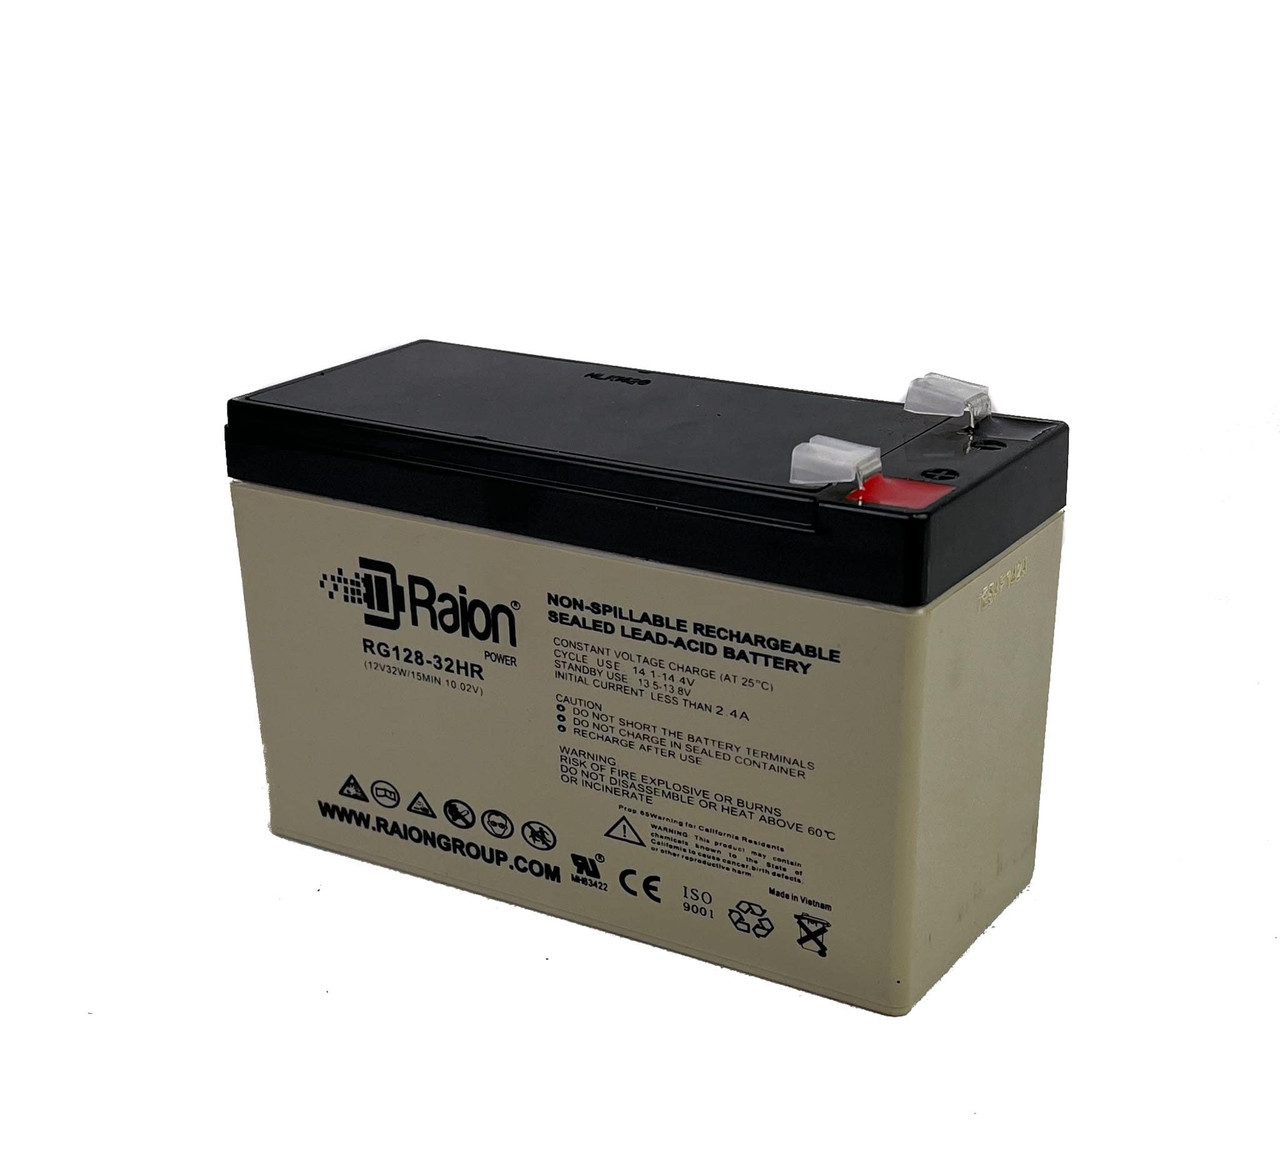 Raion Power RG128-36HR Replacement High Rate Discharge Battery for PCM Powercom Vanguard 2000VA Tower